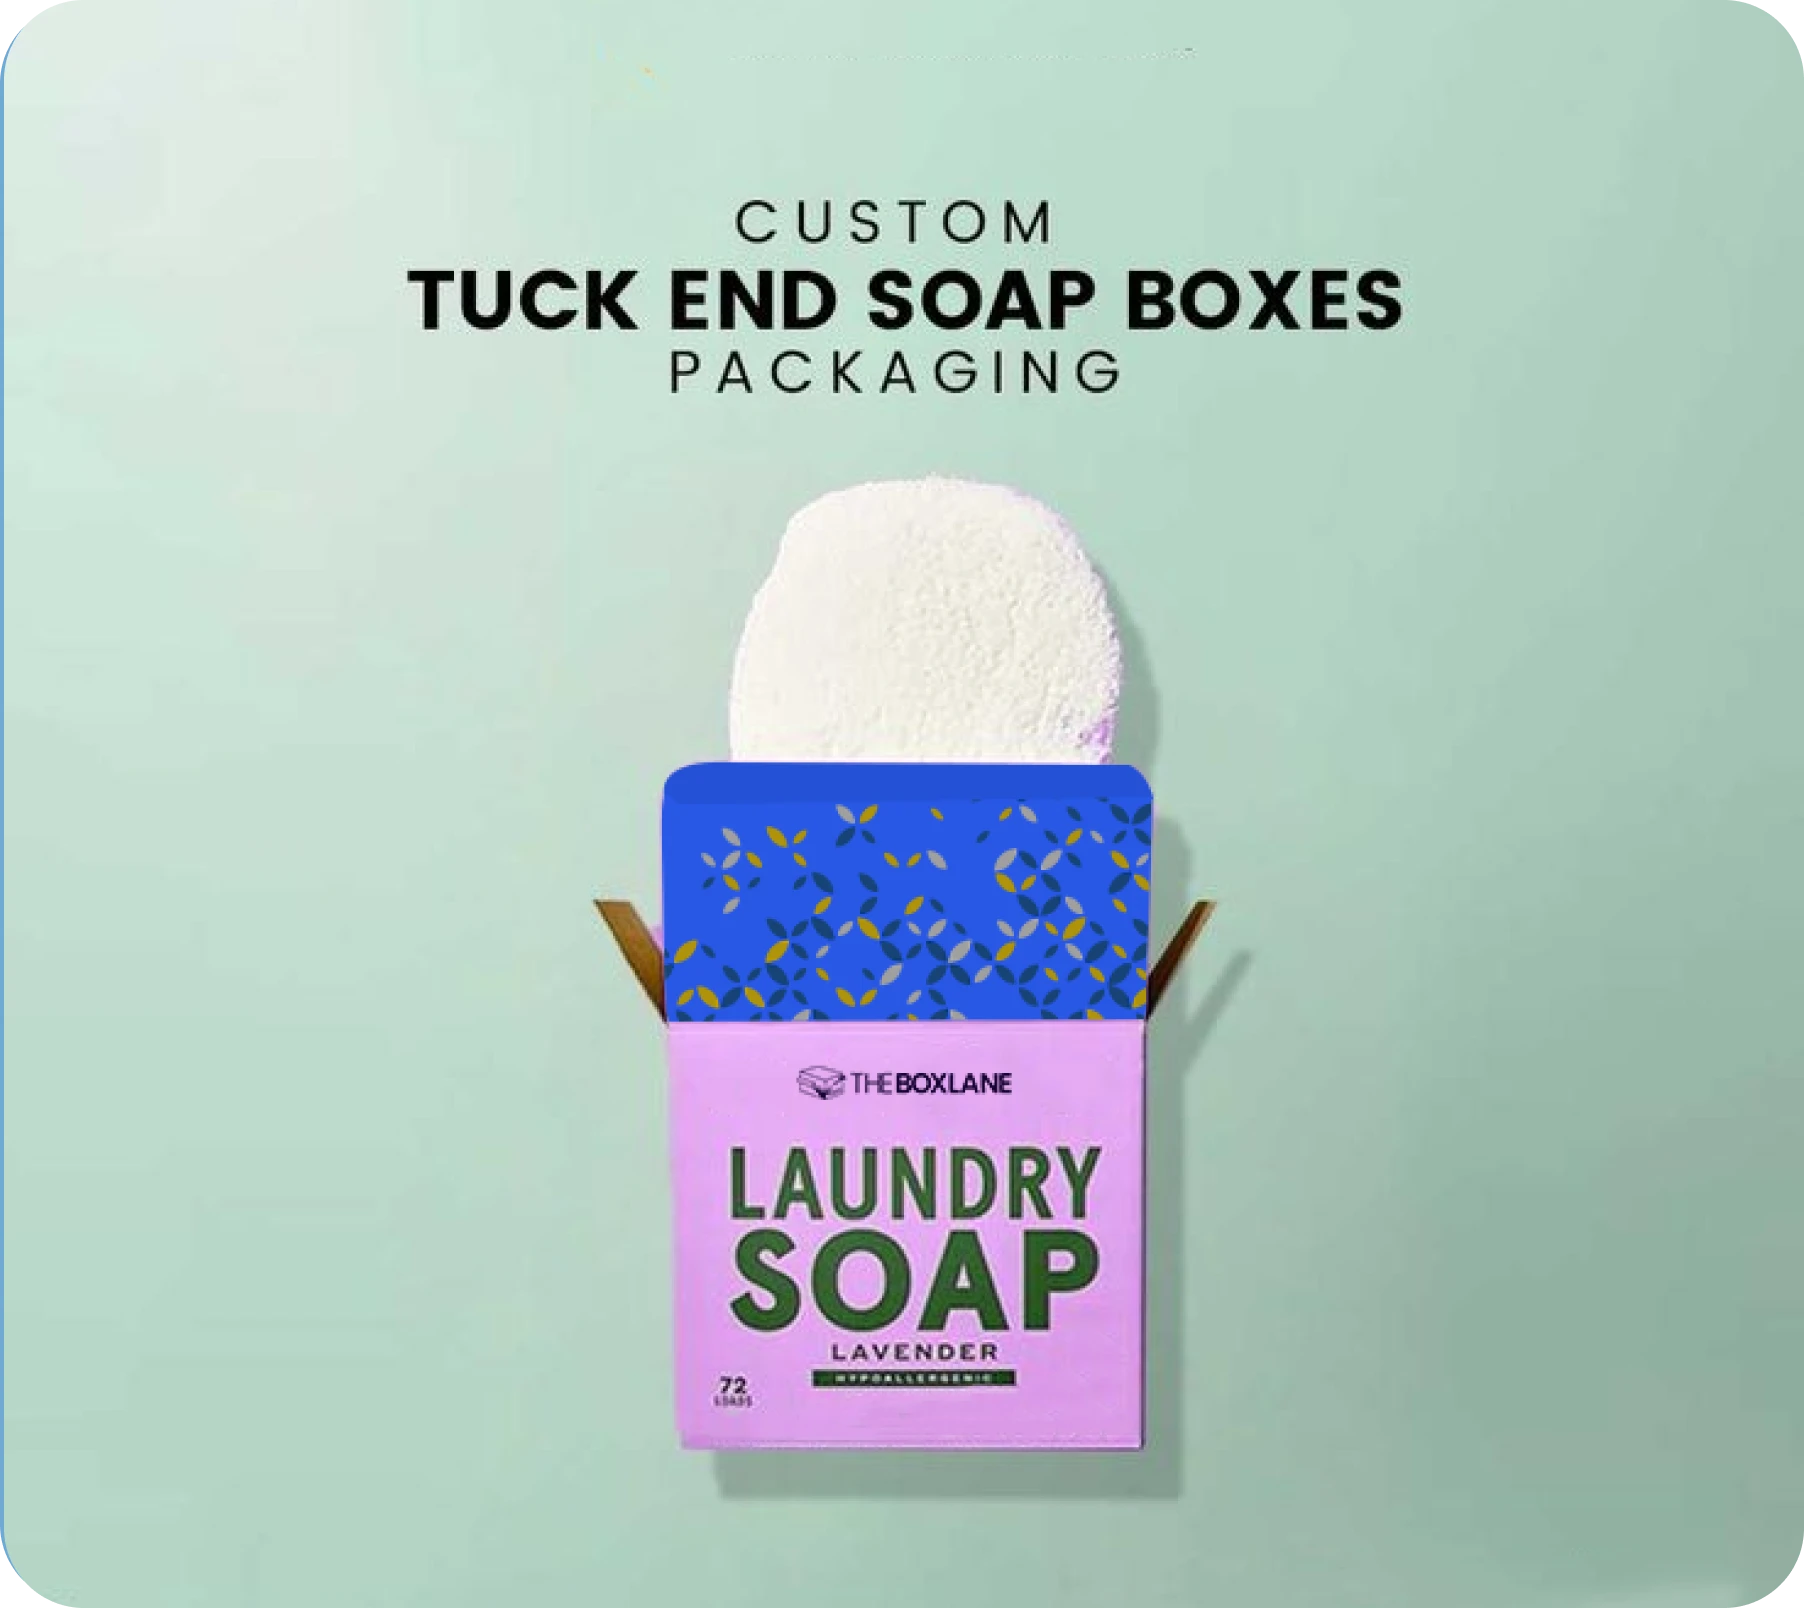 Choose The Box Lane for Tuck End Soap Boxes Packaging | The Box Lane